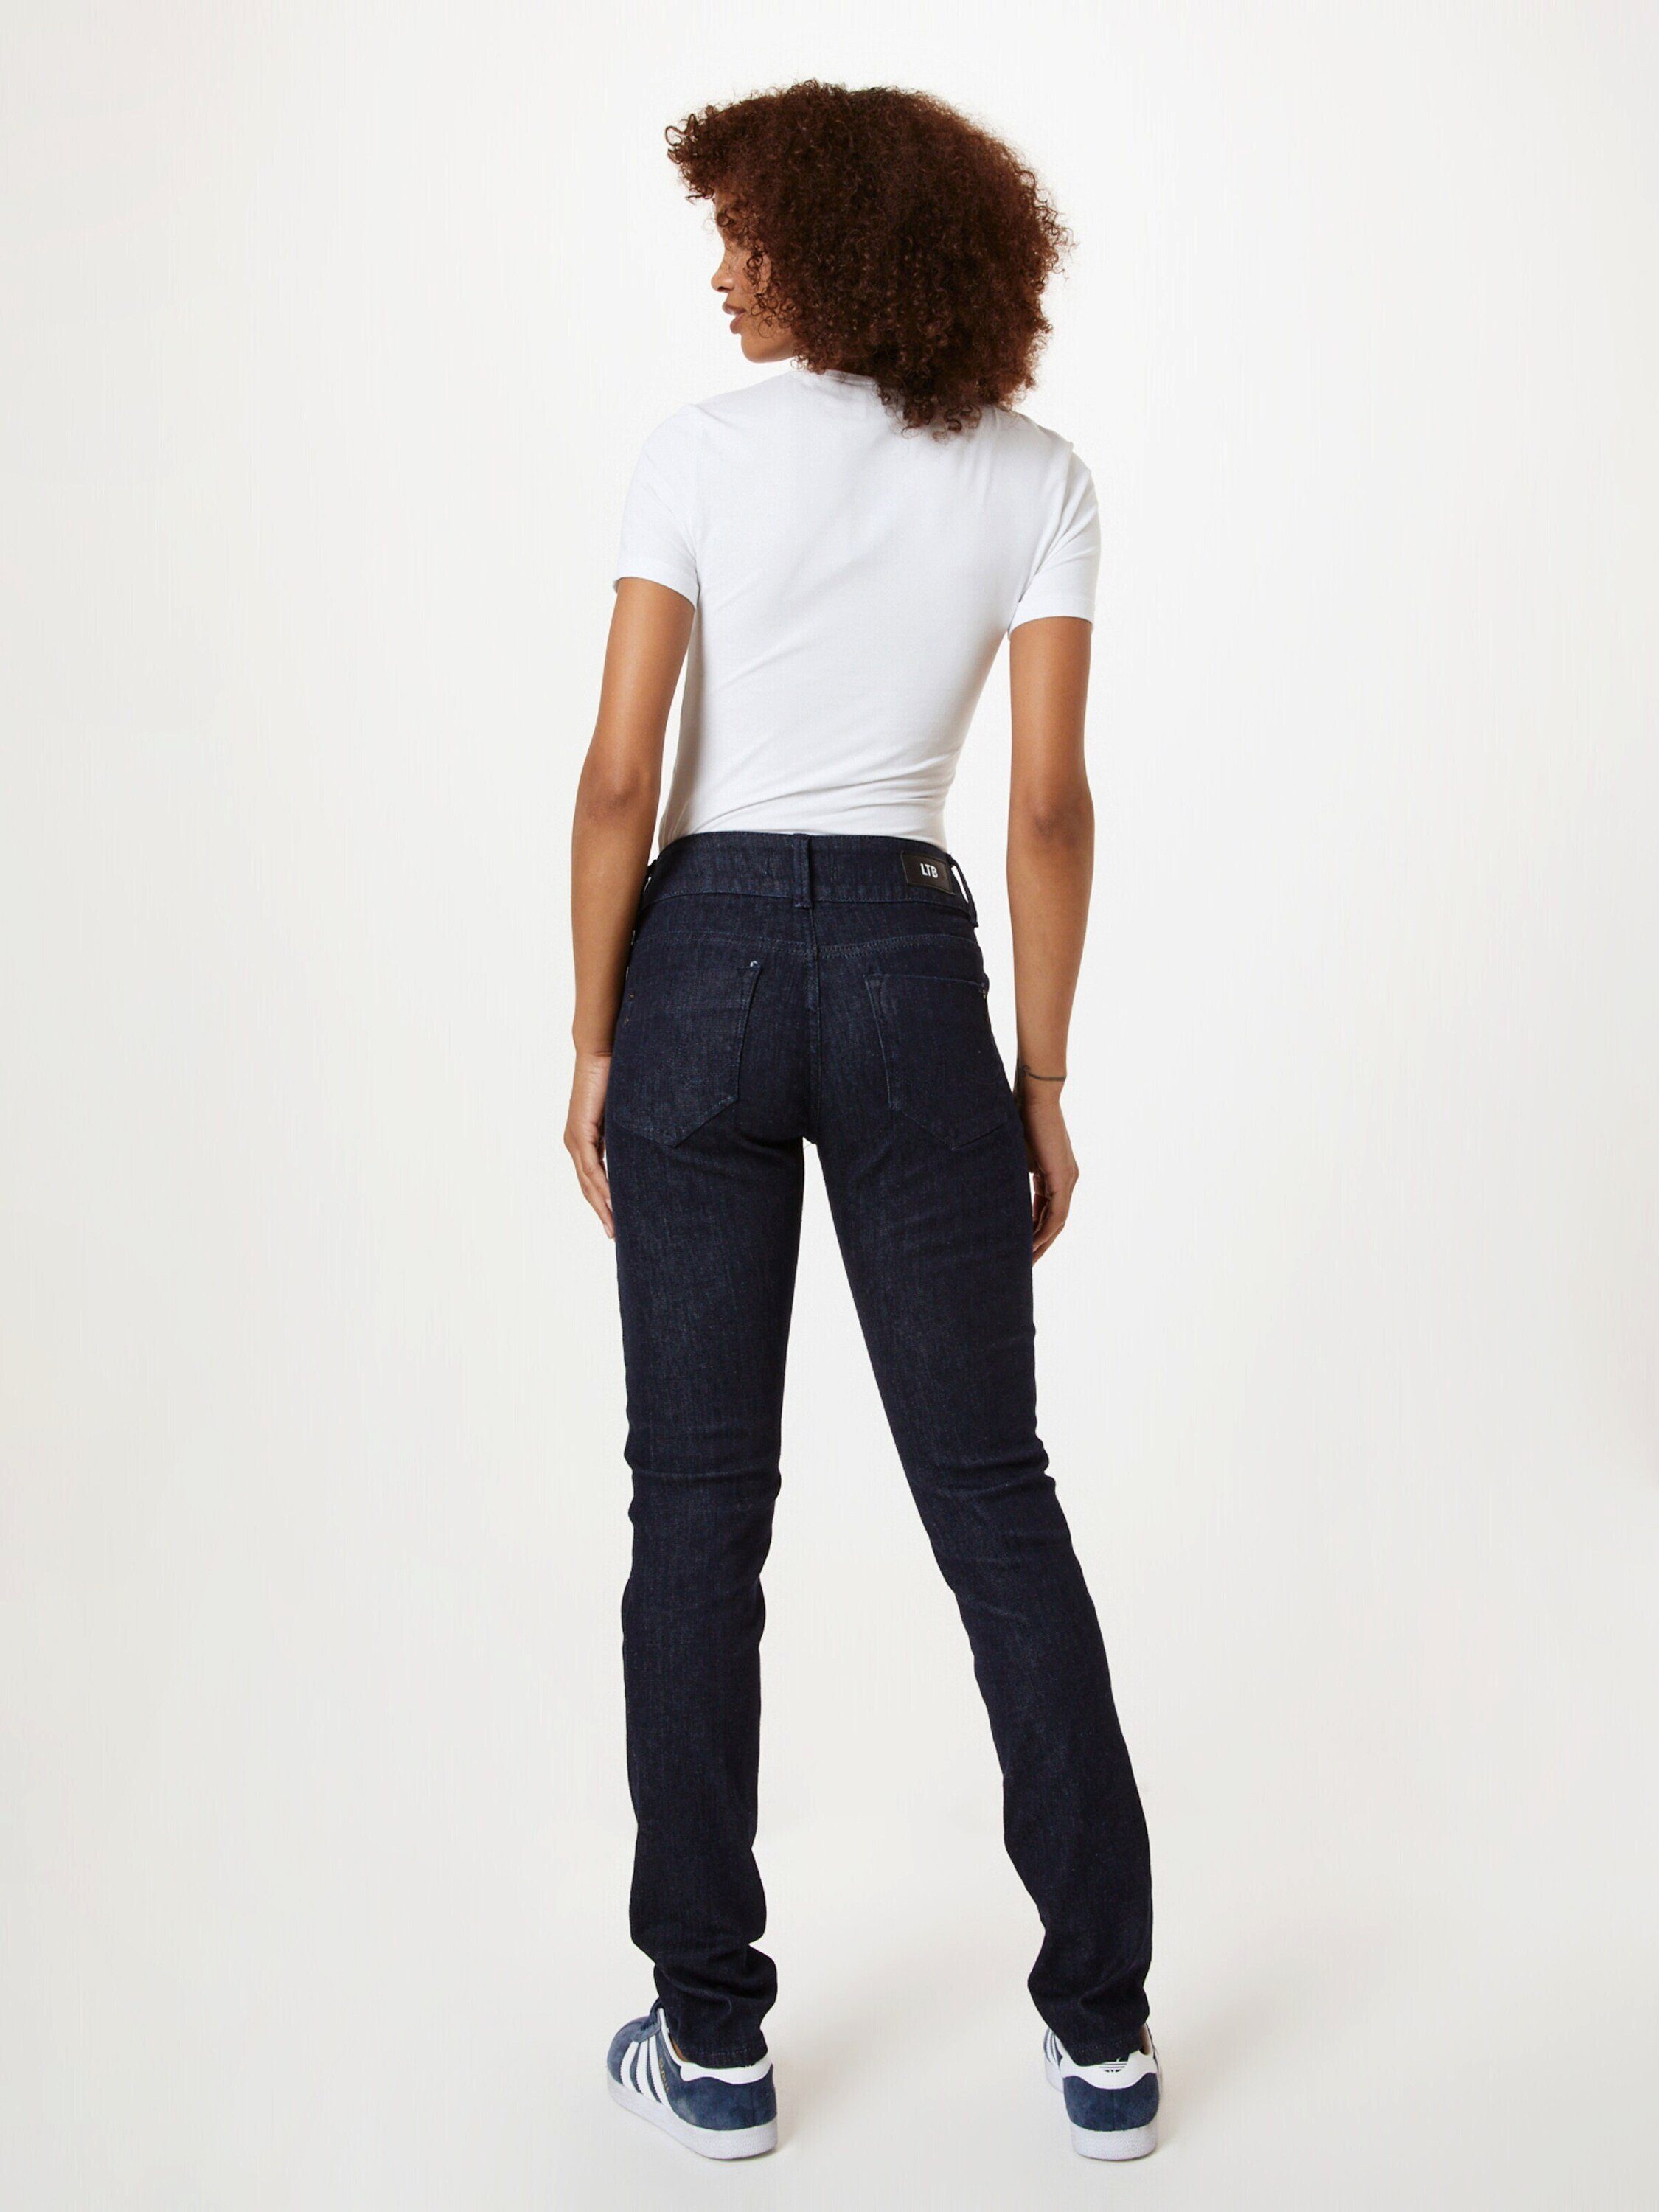 Weiteres Plain/ohne Slim-fit-Jeans Detail LTB Molly Details, (1-tlg)